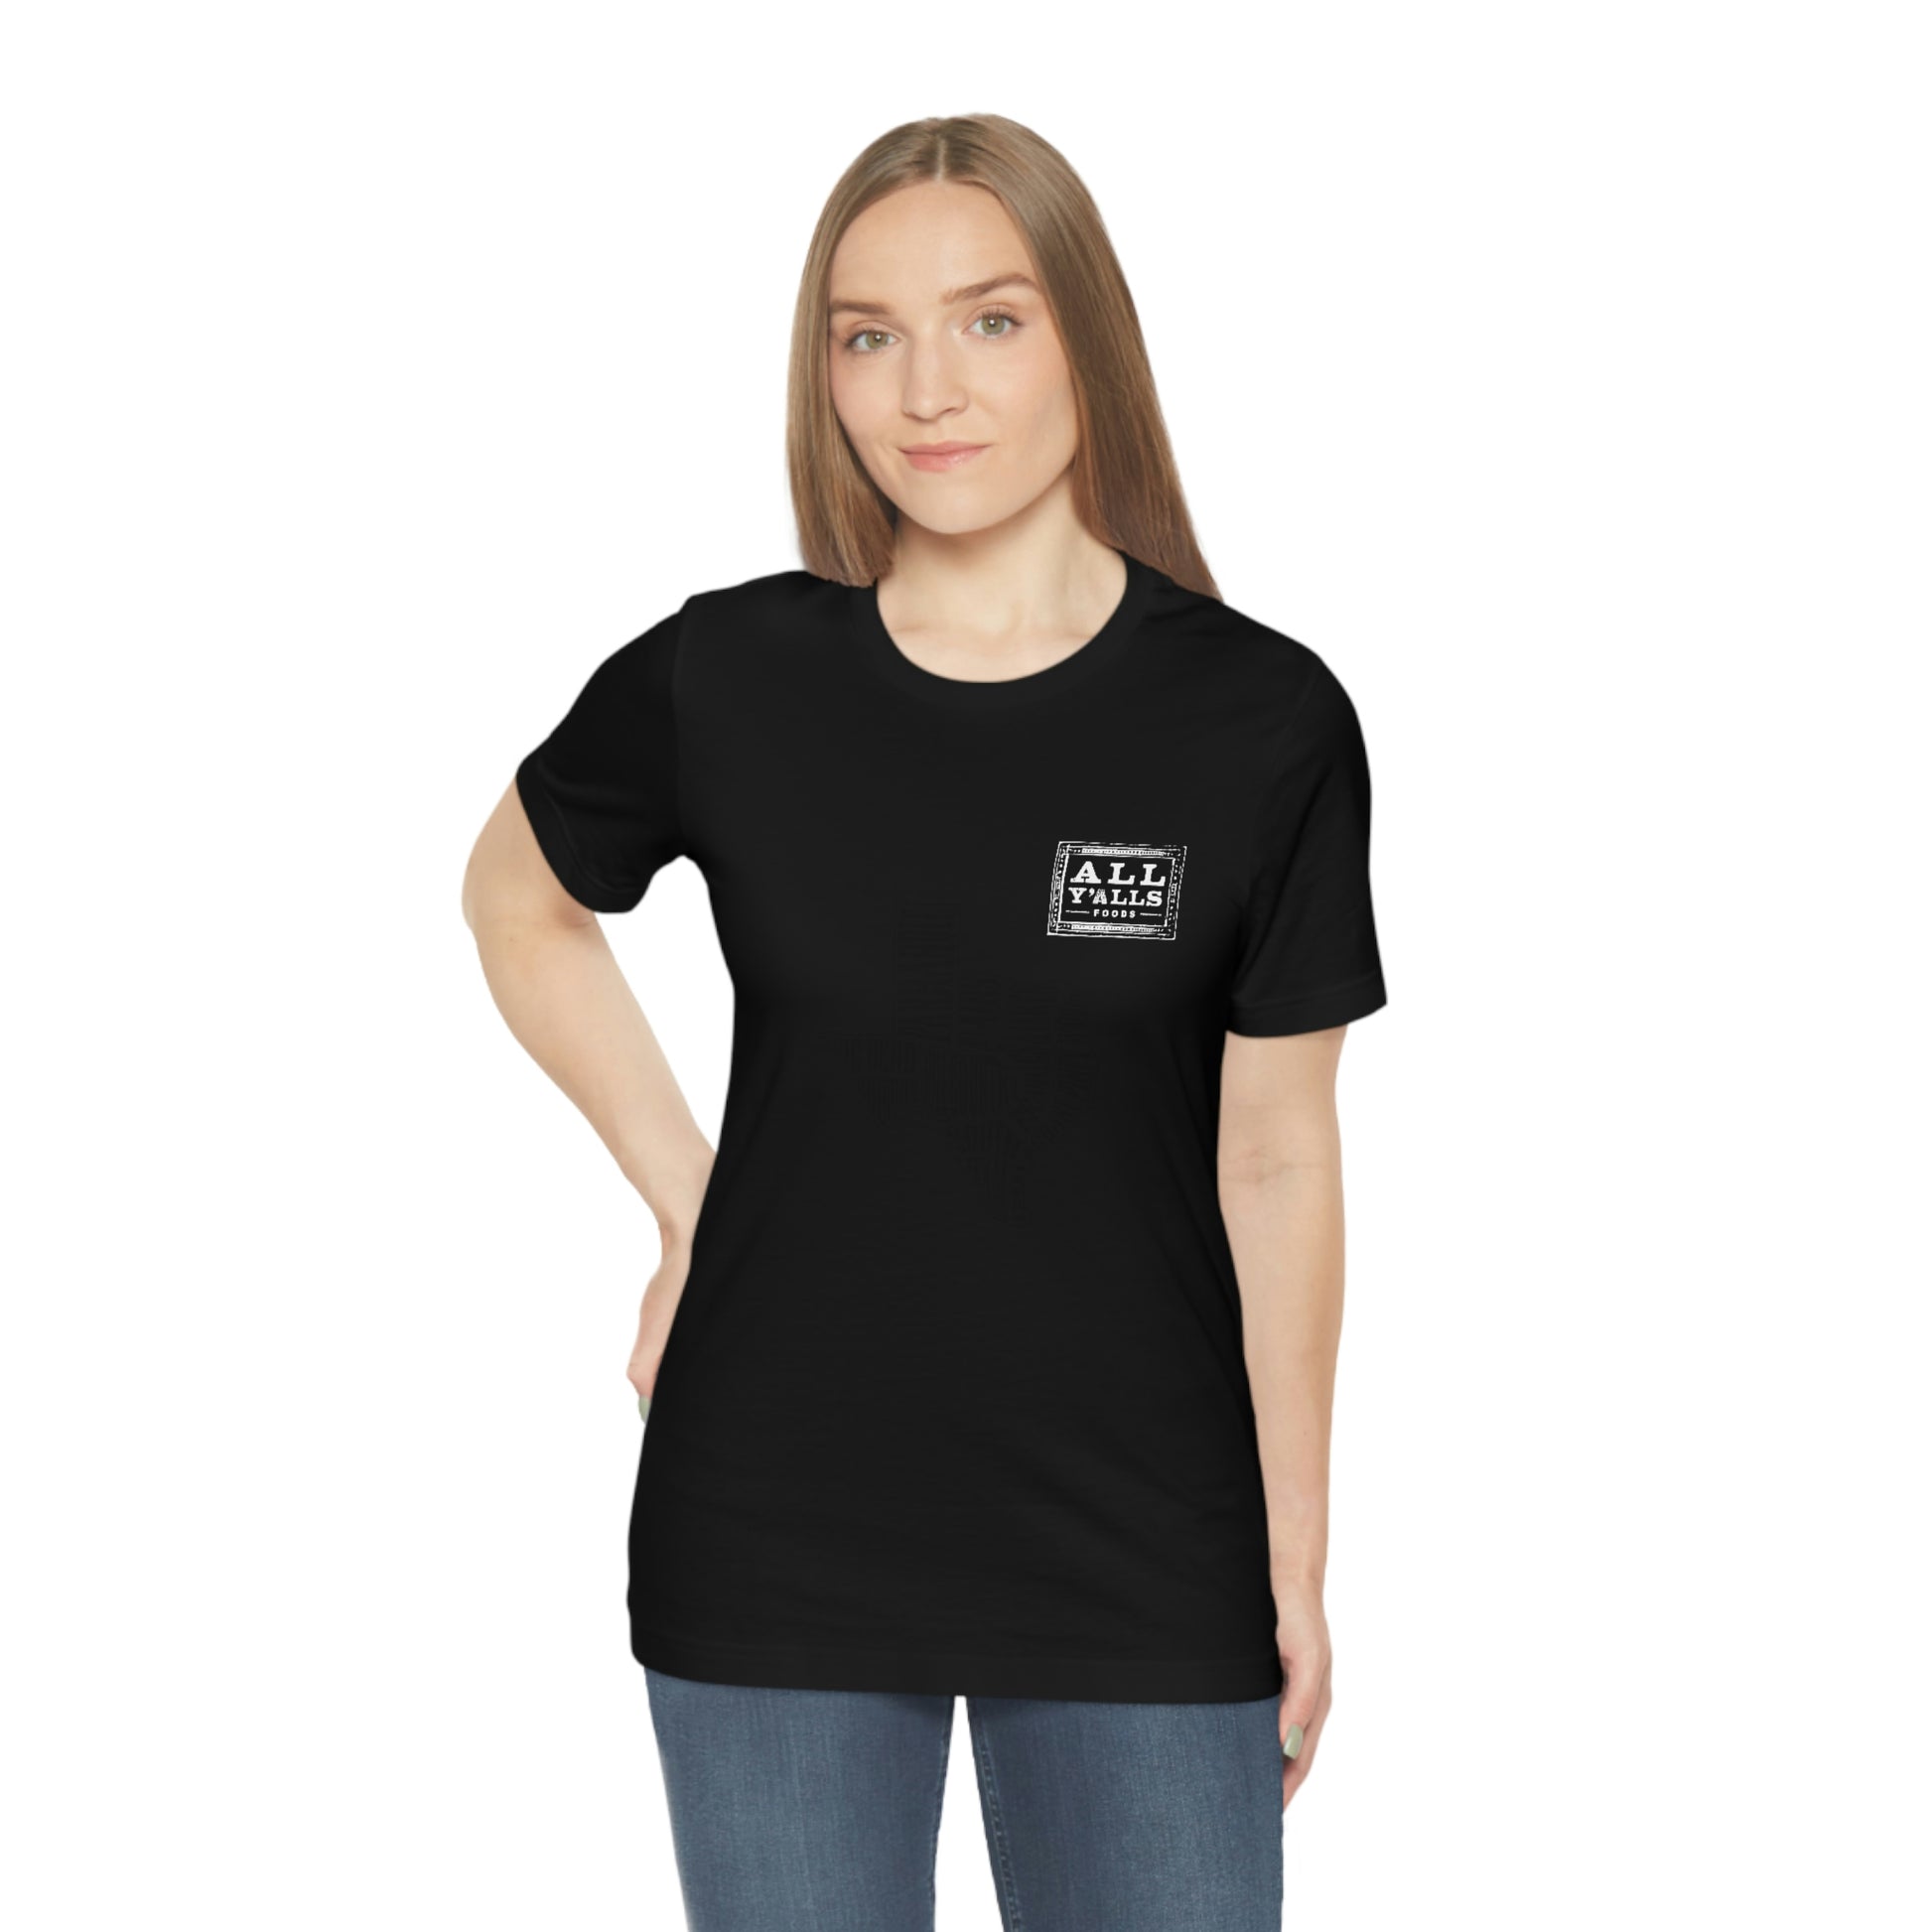 Four Squares intersecting - Black Unisex Jersey T-Shirt